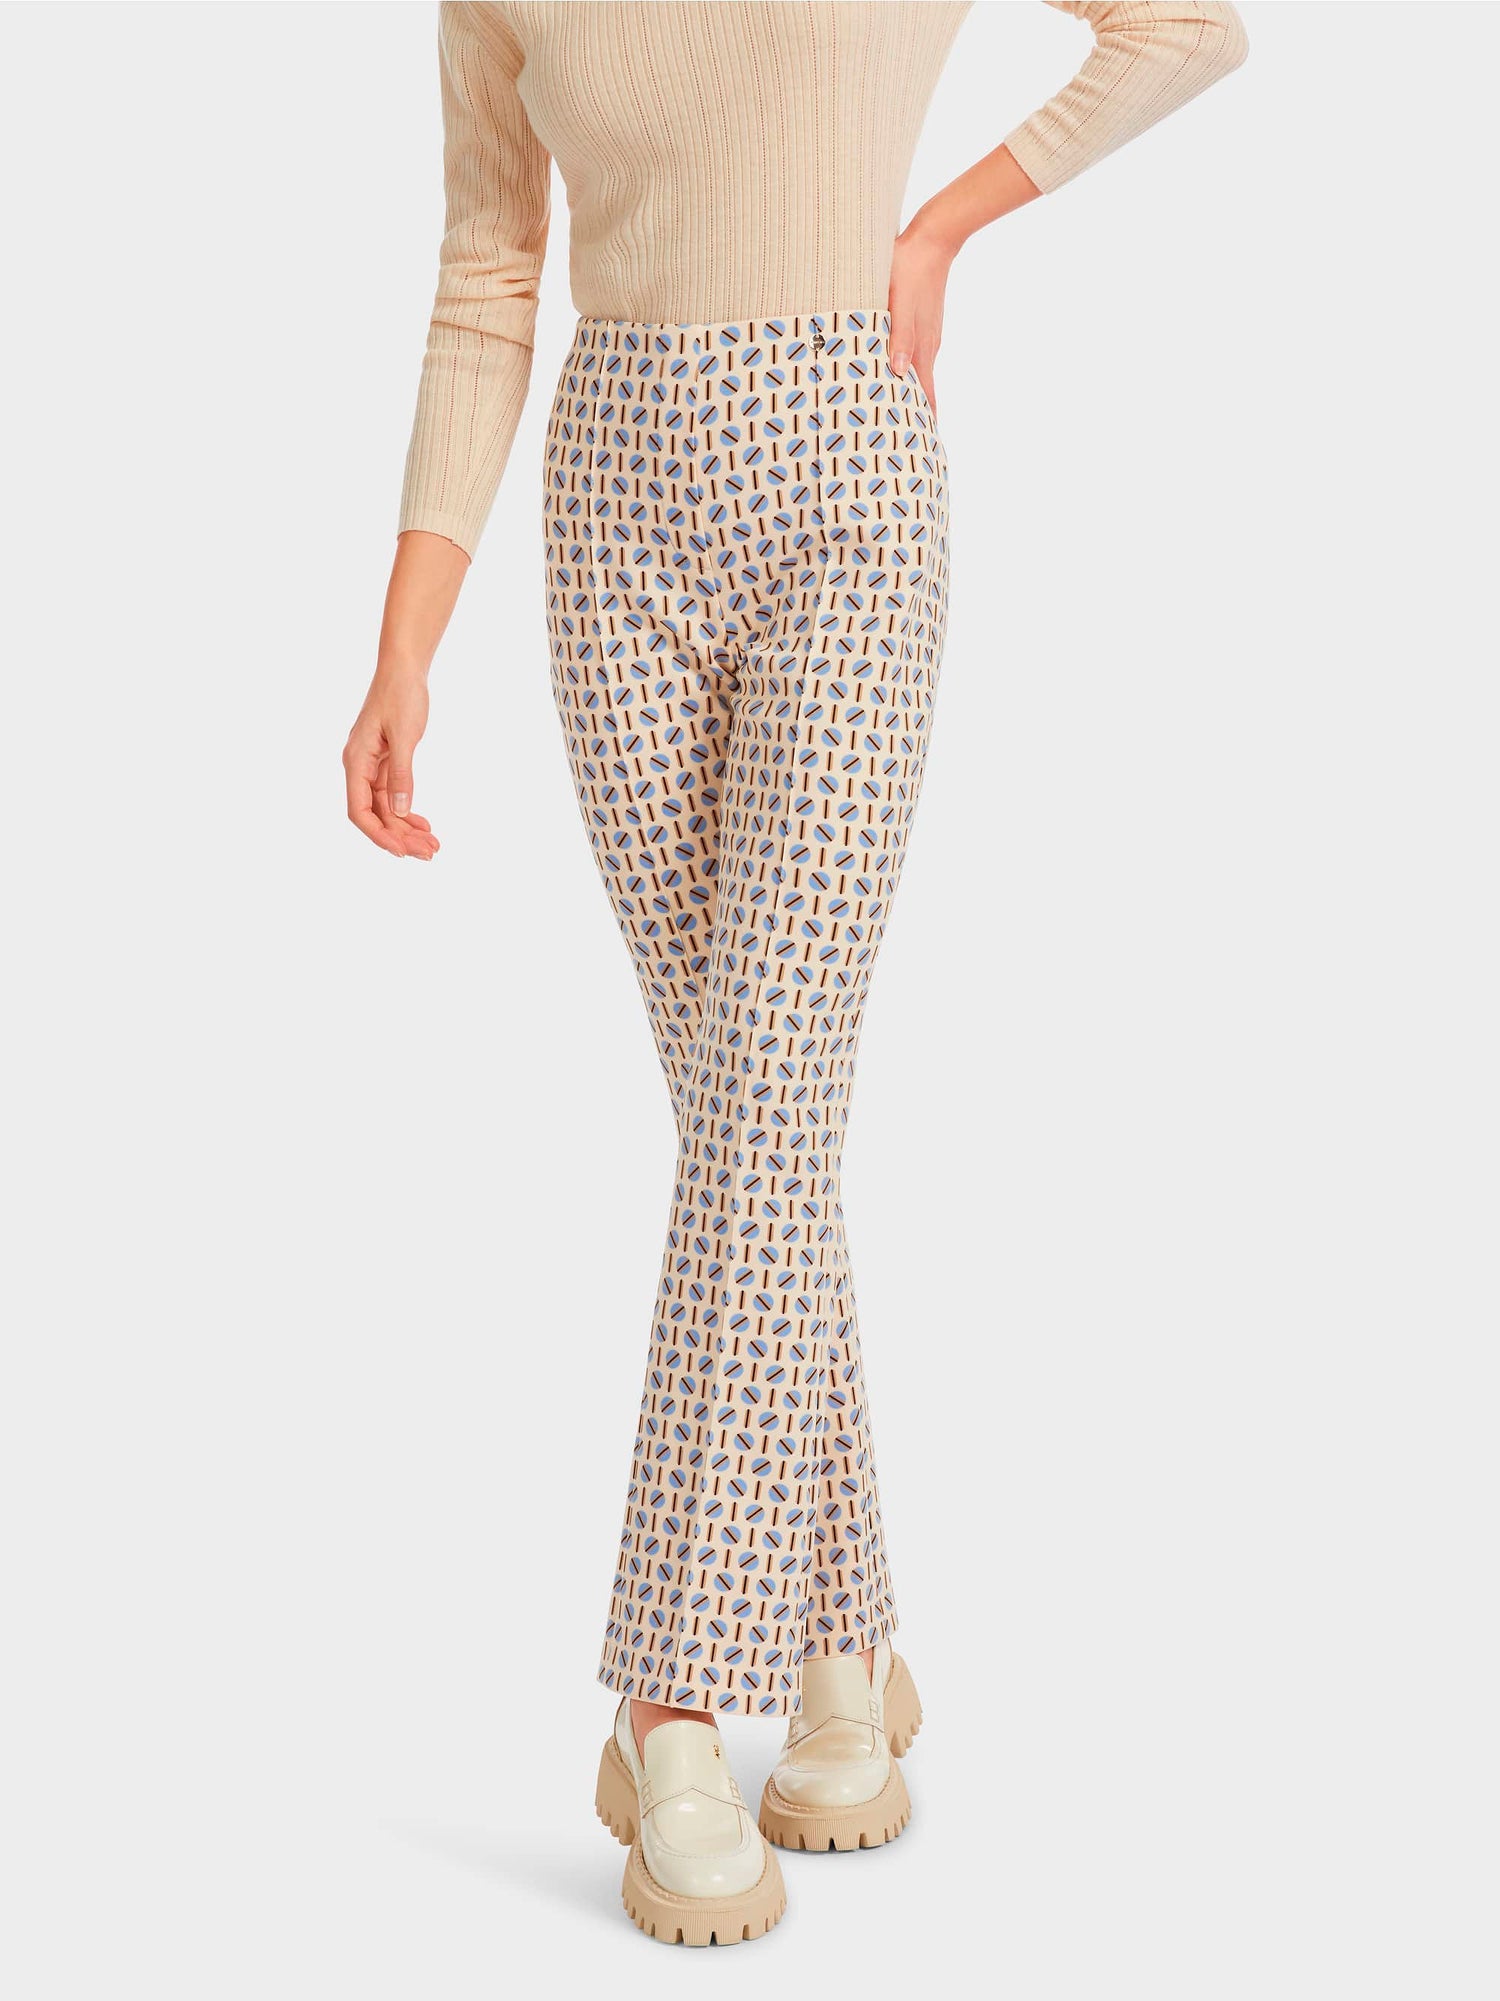 Frederica Pants In Graphic Print_VC 81.28 J04_321_04